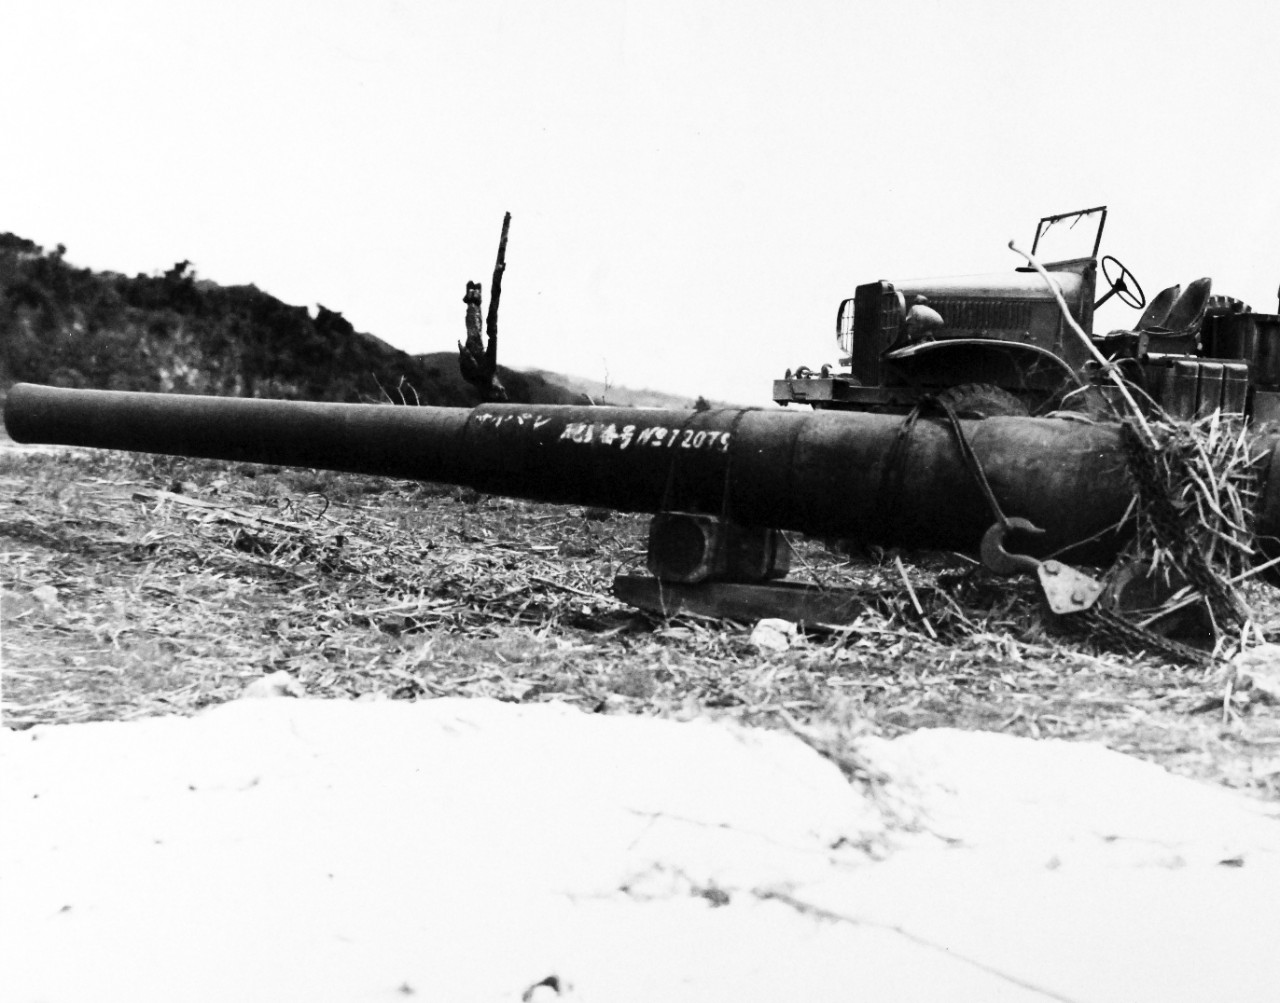 80-G-287245:   Invasion of Saipan, June-July 1944.  Enemy guns found on Saipan after its occupation by American forces, 6” gun north of Tanapag, July 12, 1944.  Photographed by USS Indianapolis (CA-35) photographer.   Official U.S. Navy Photograph, now in the collections of the National Archives.  (2017/03/21).  